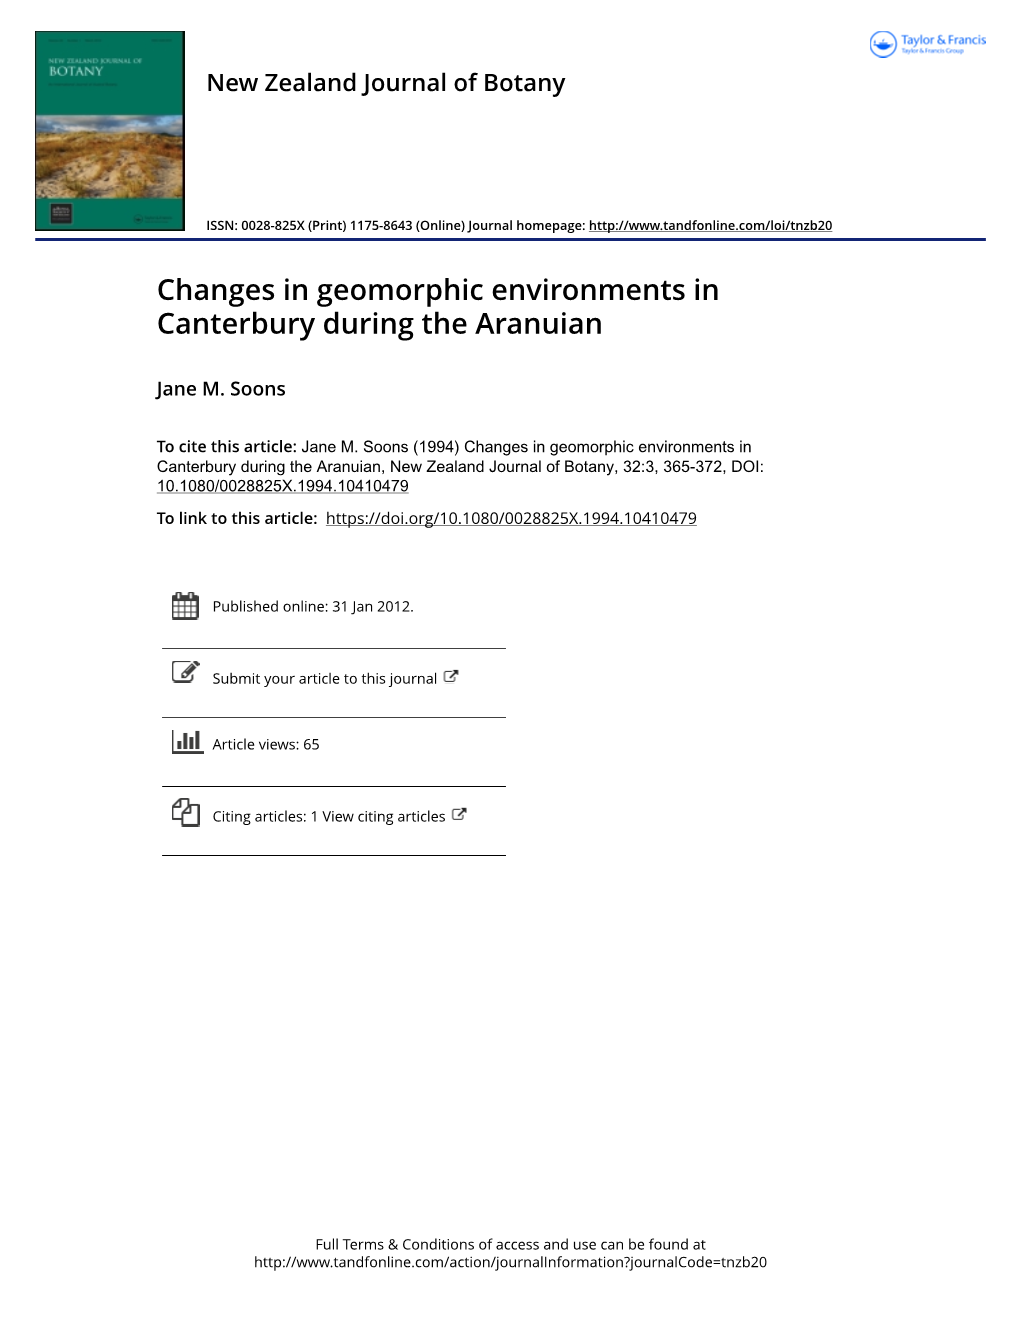 Changes in Geomorphic Environments in Canterbury During the Aranuian